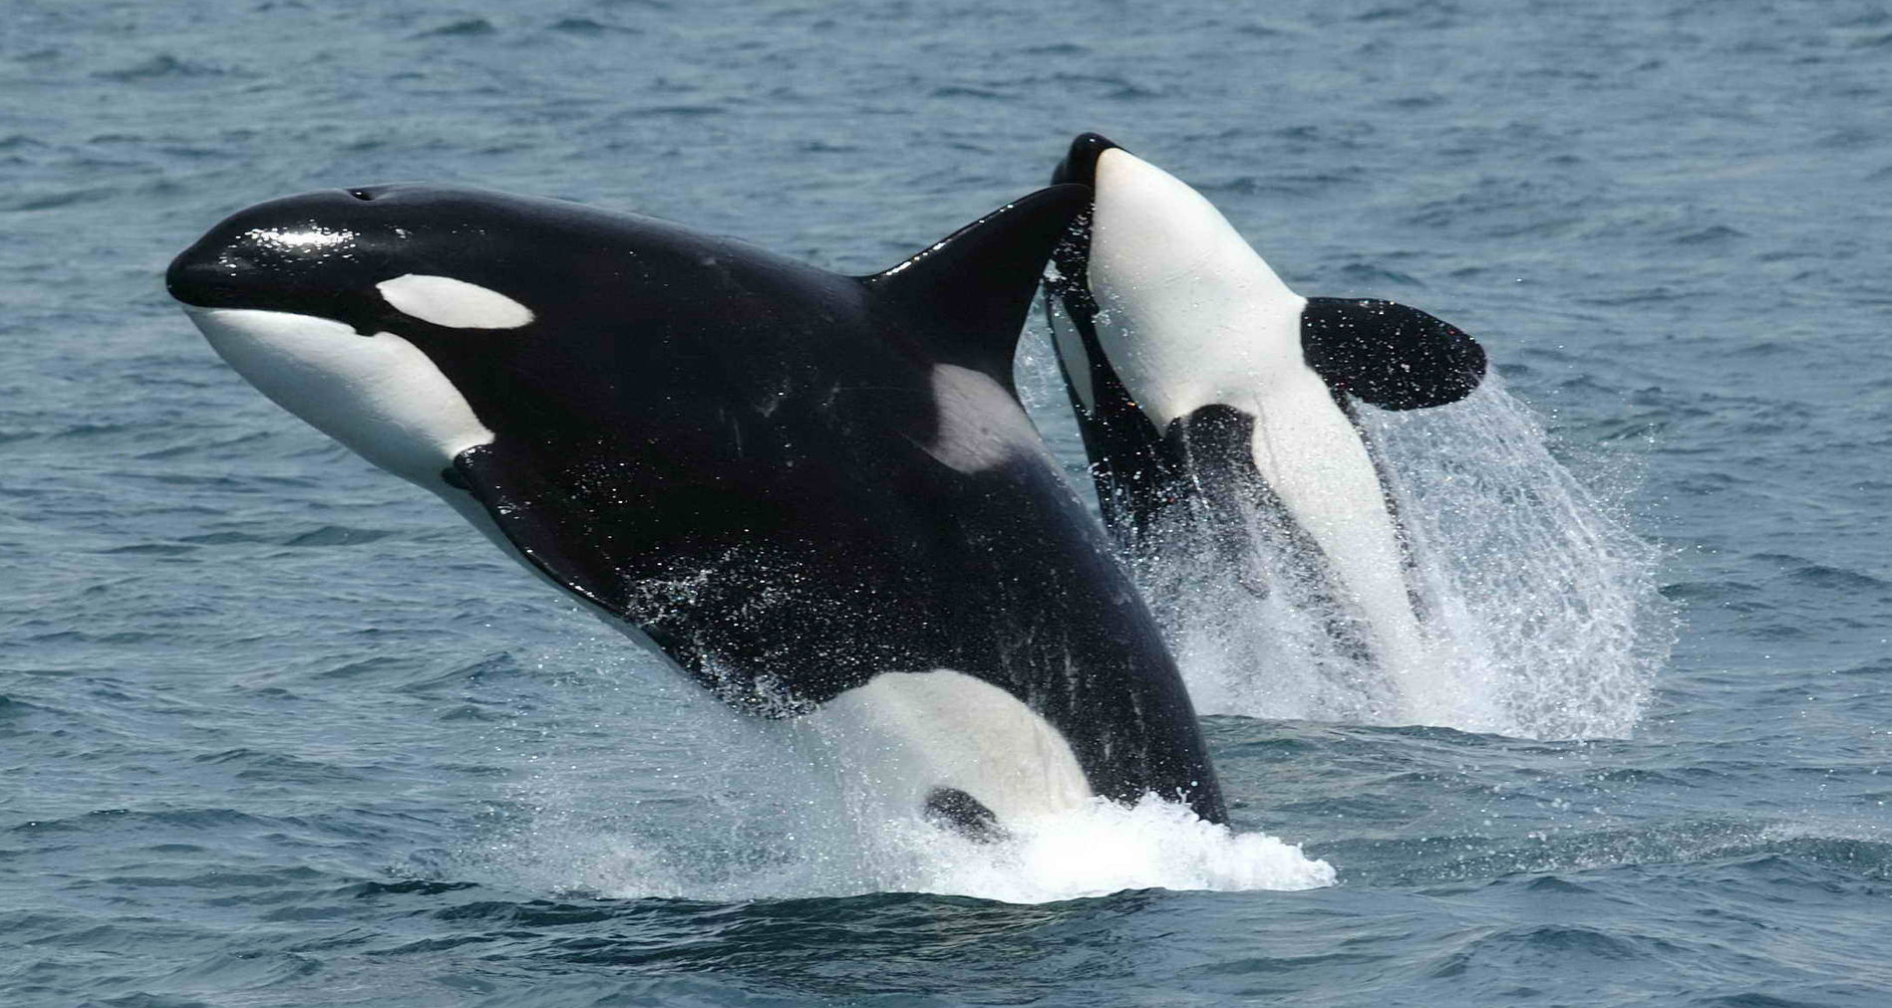 A chance sighting of Killer Whales catapults two Club members into the media limelight